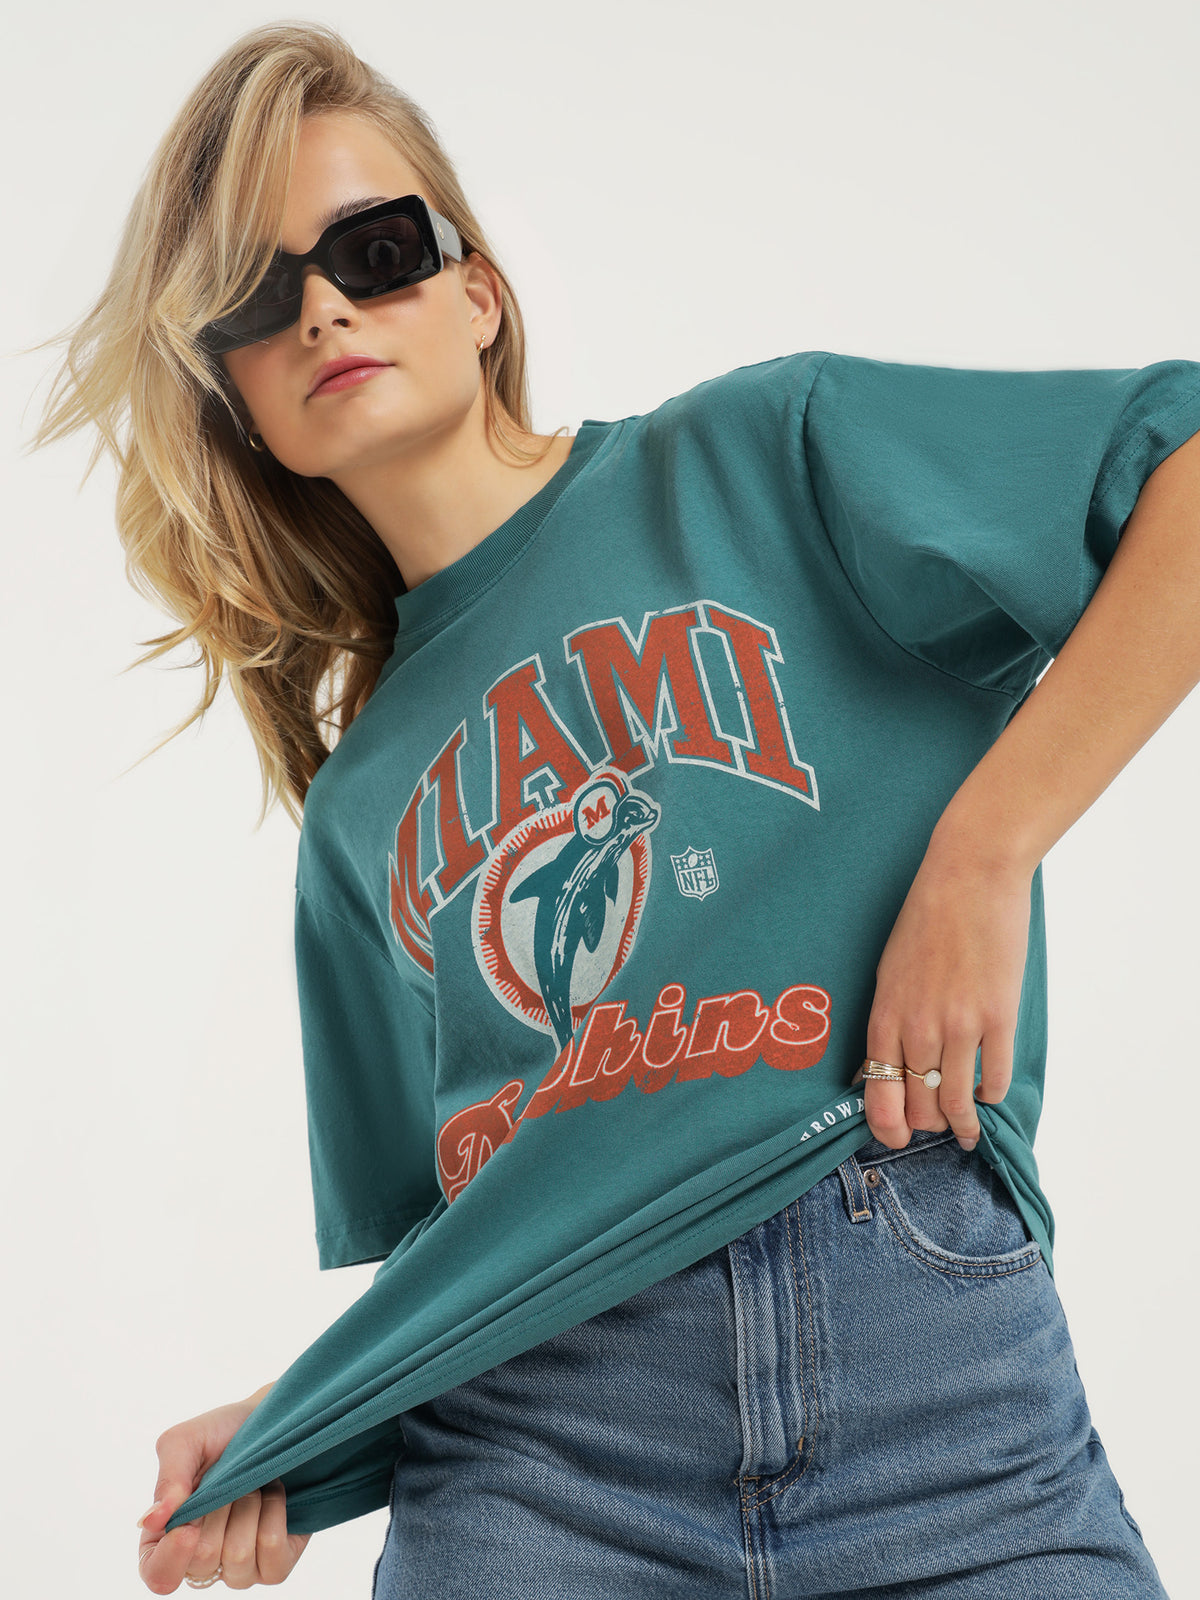 Team Up Dolphins T-Shirt in Teal